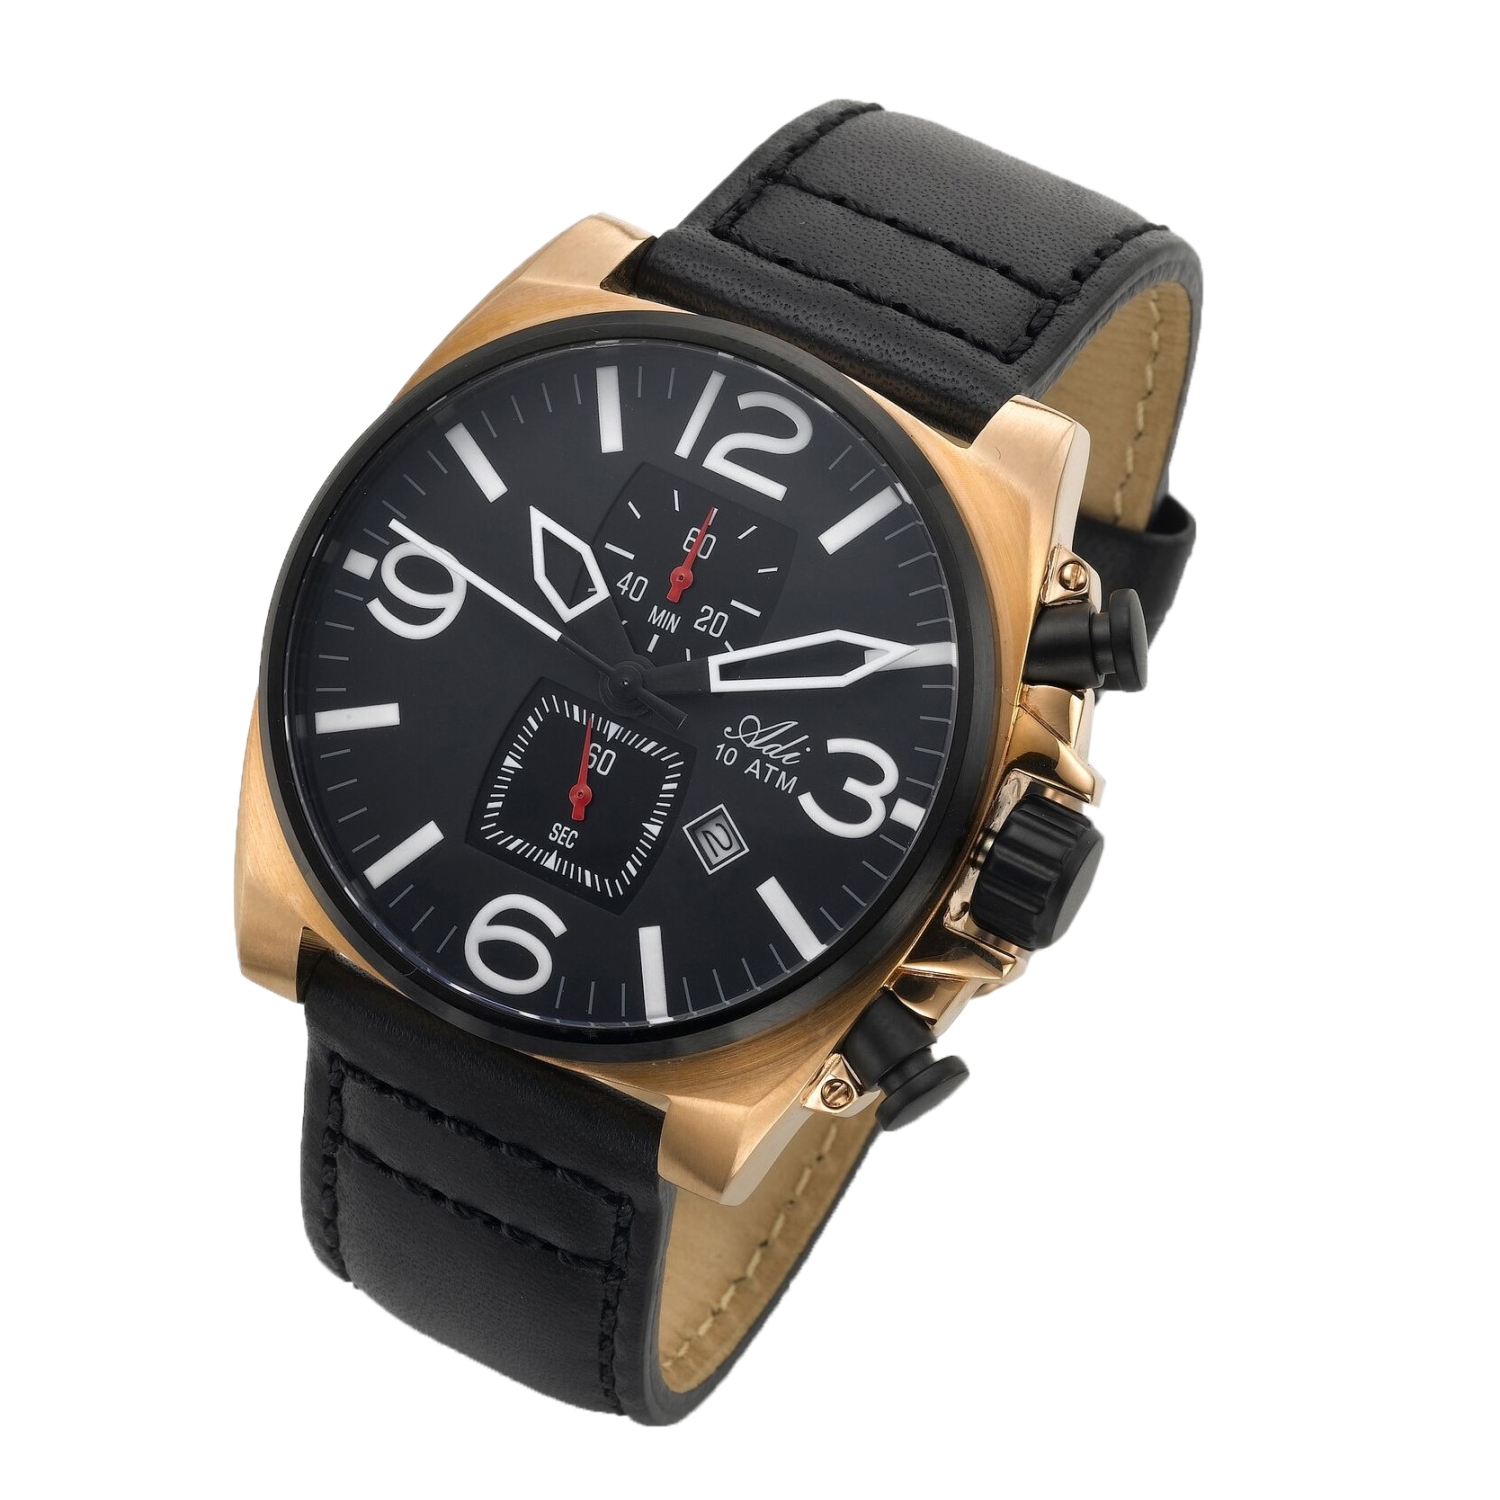 Adi Large-Faced Black and Copper Watch with Leather Strap - 1